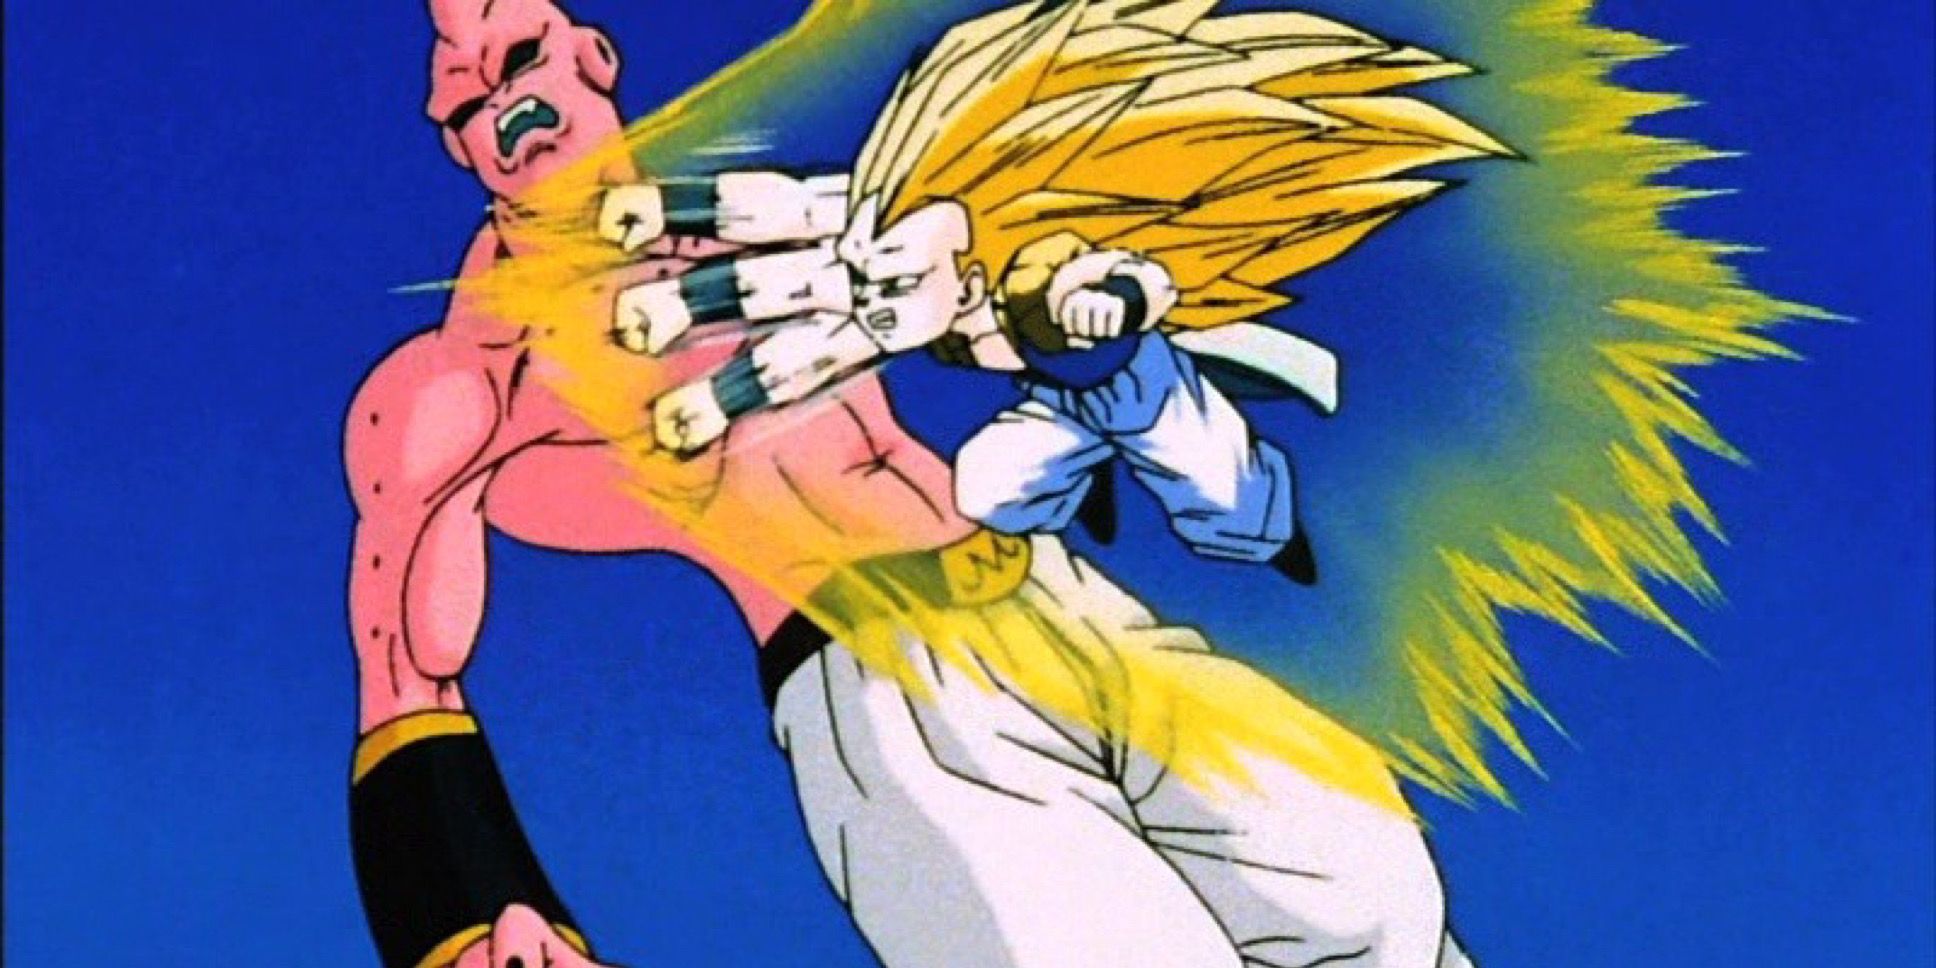 Gotenks punches Buu in Dragon Ball Z.